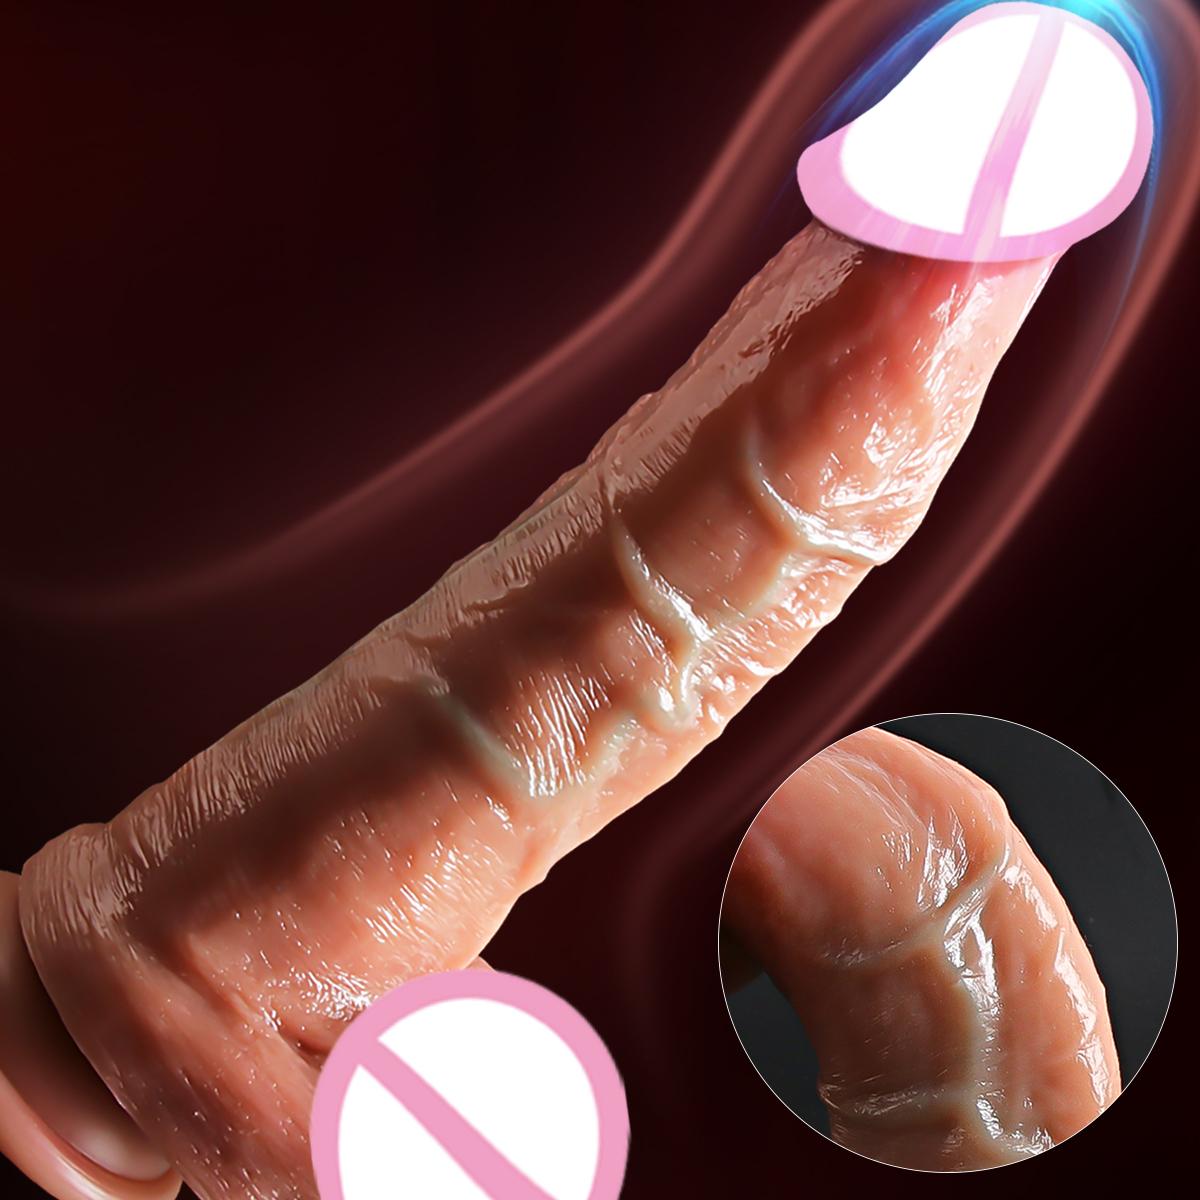 Factory Price Natural Silicone Waterproof Manual Control Adult Female Masturbation Dildos For Women